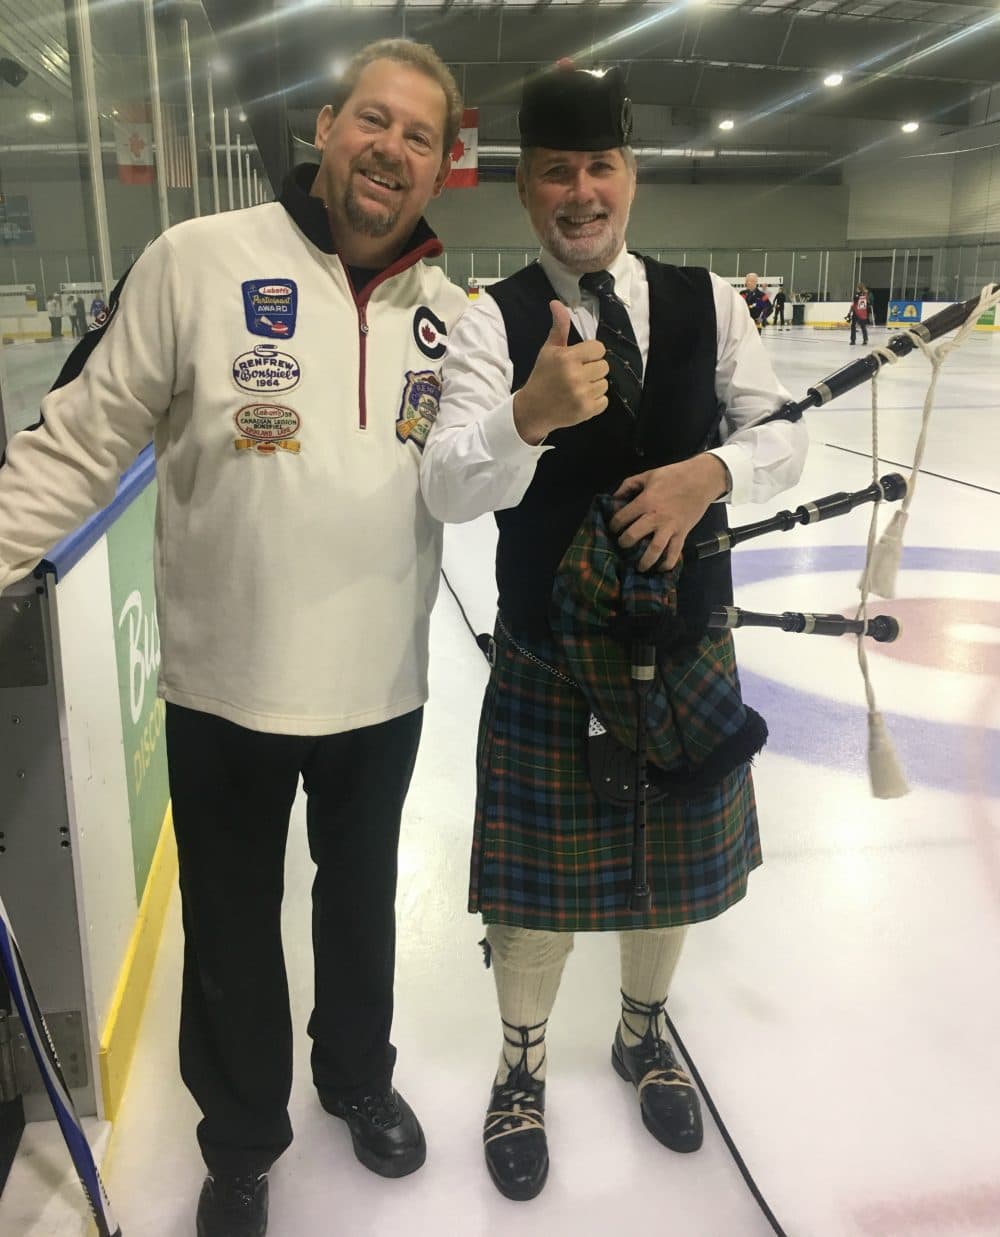 Bernie, left, with bagpiper, Paul Macleish, who plays at championship games and other special Tampa Bay Curling Club events. (Courtesy Karen Hooper)